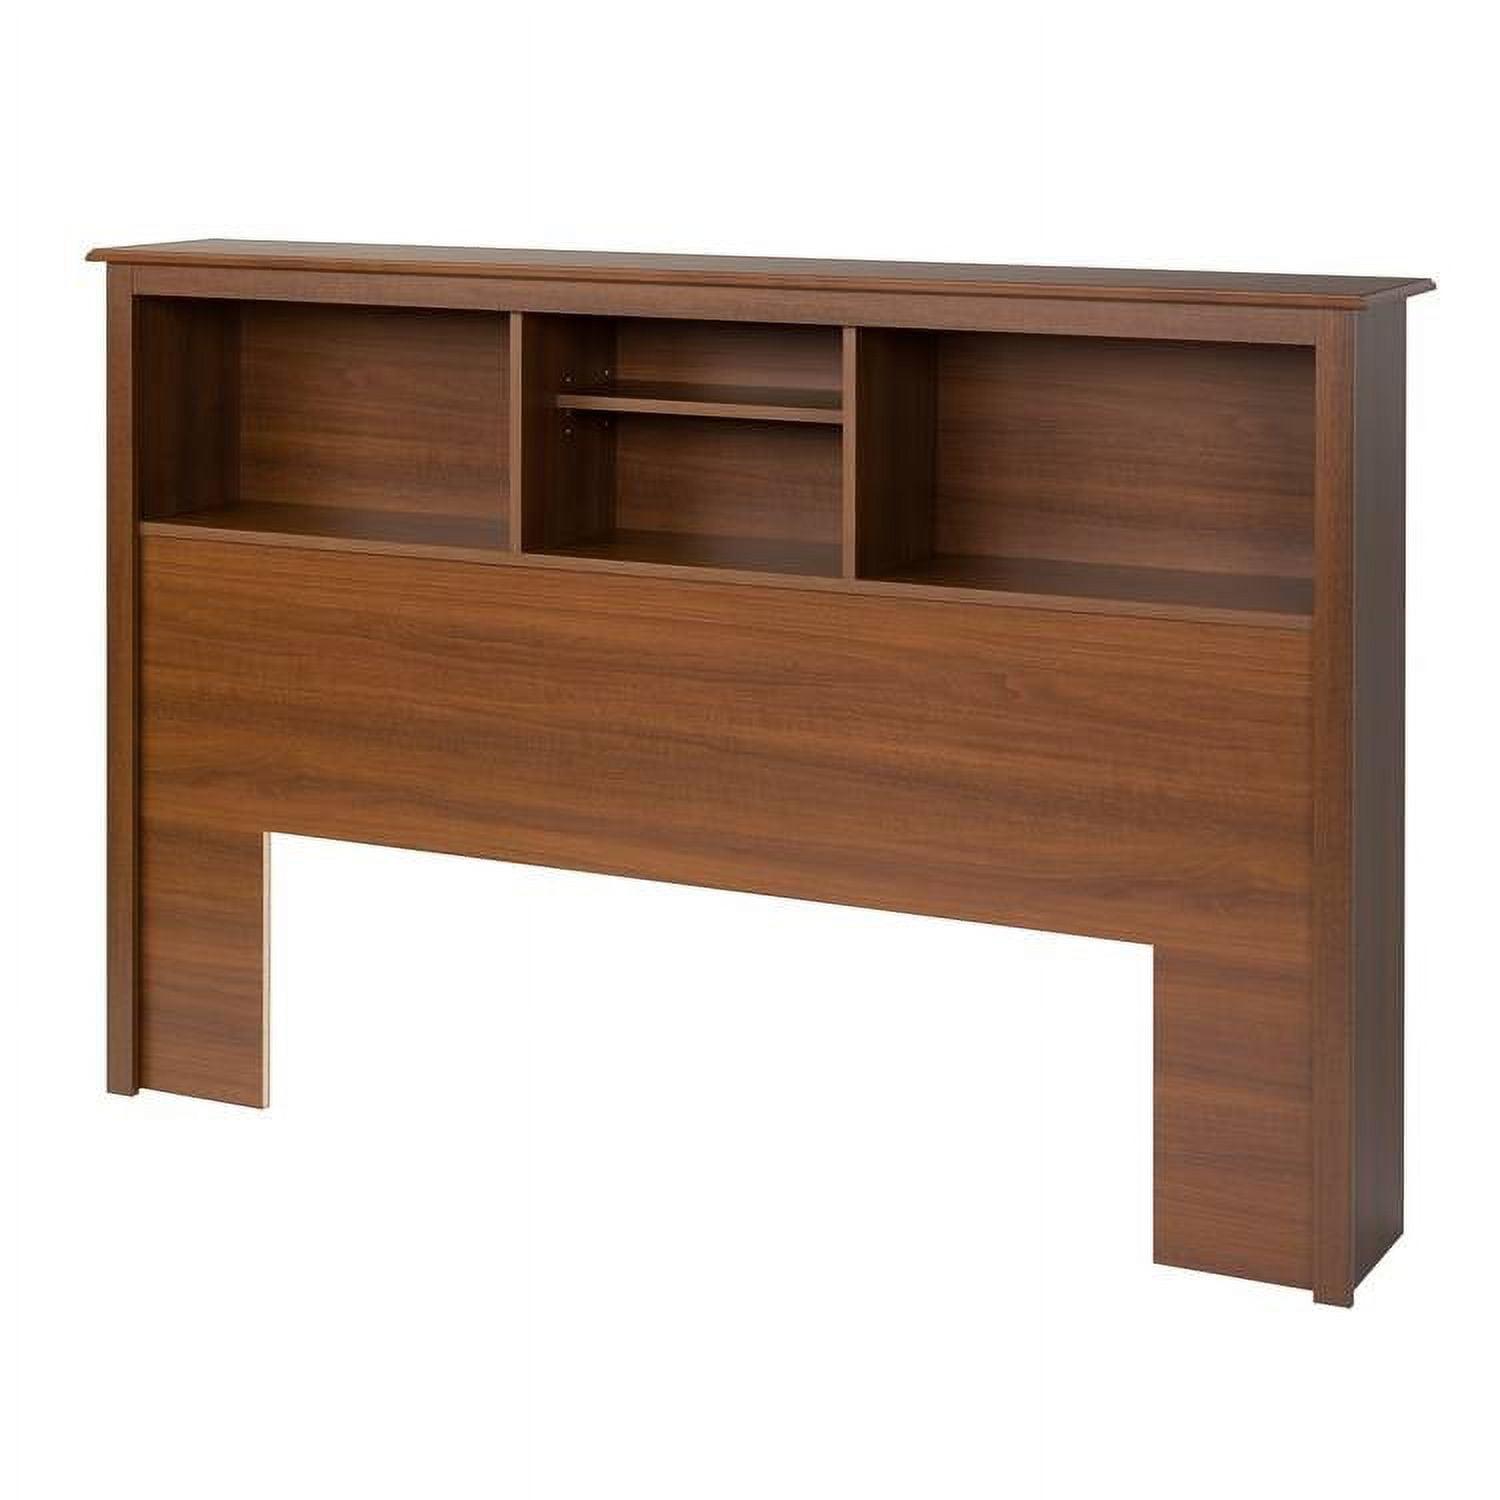 Full/Queen Cherry Wood Bookcase Headboard with Storage